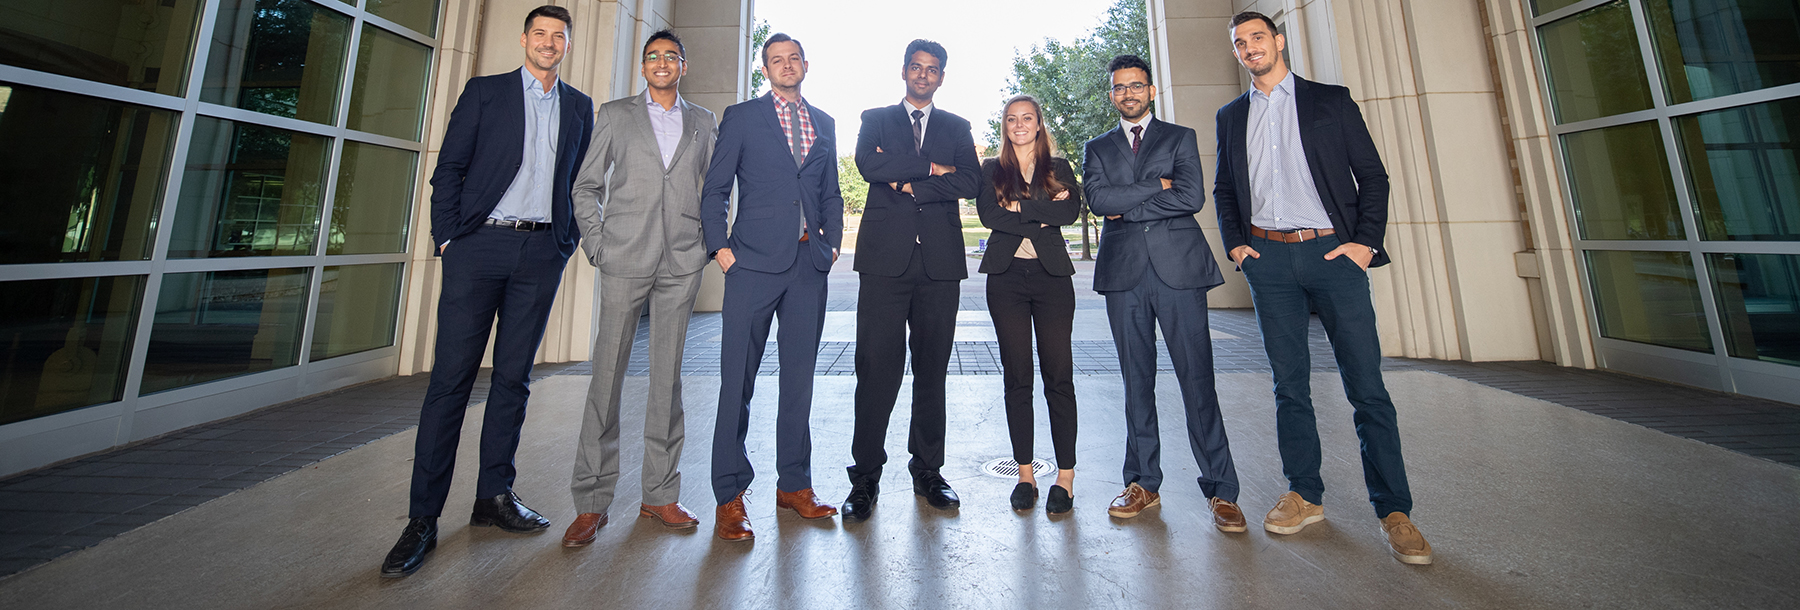 Section Image: MBA students in the BLUU arch 